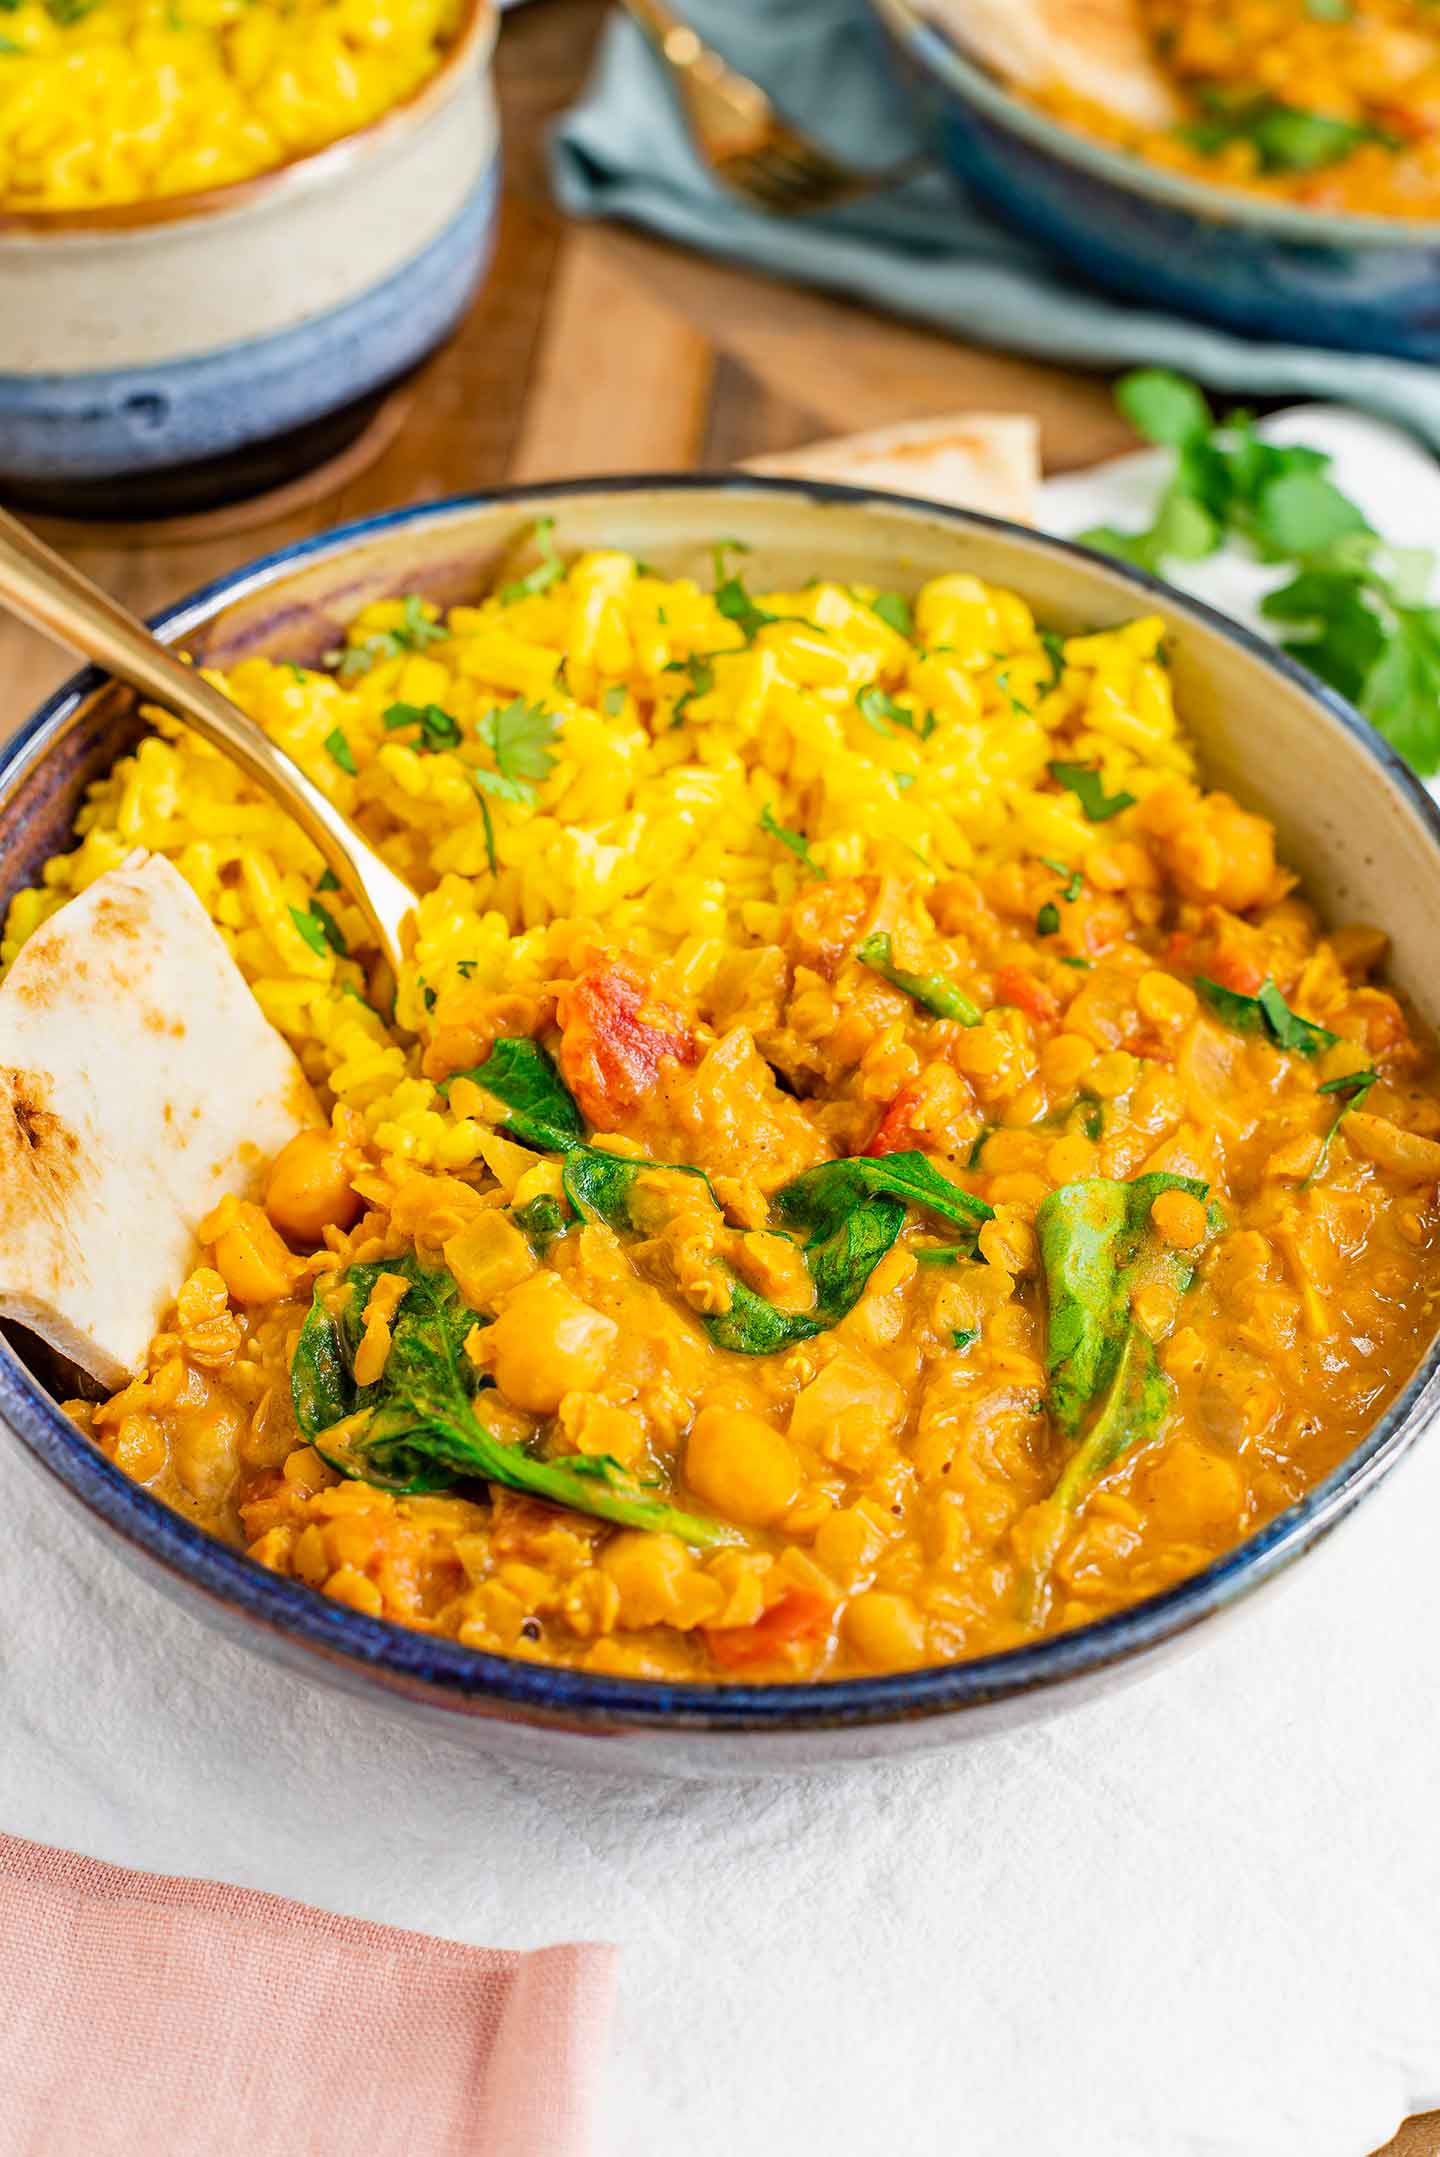 Side view of yellow turmeric rice served on the side of a vegan red lentil curry and naan bread.